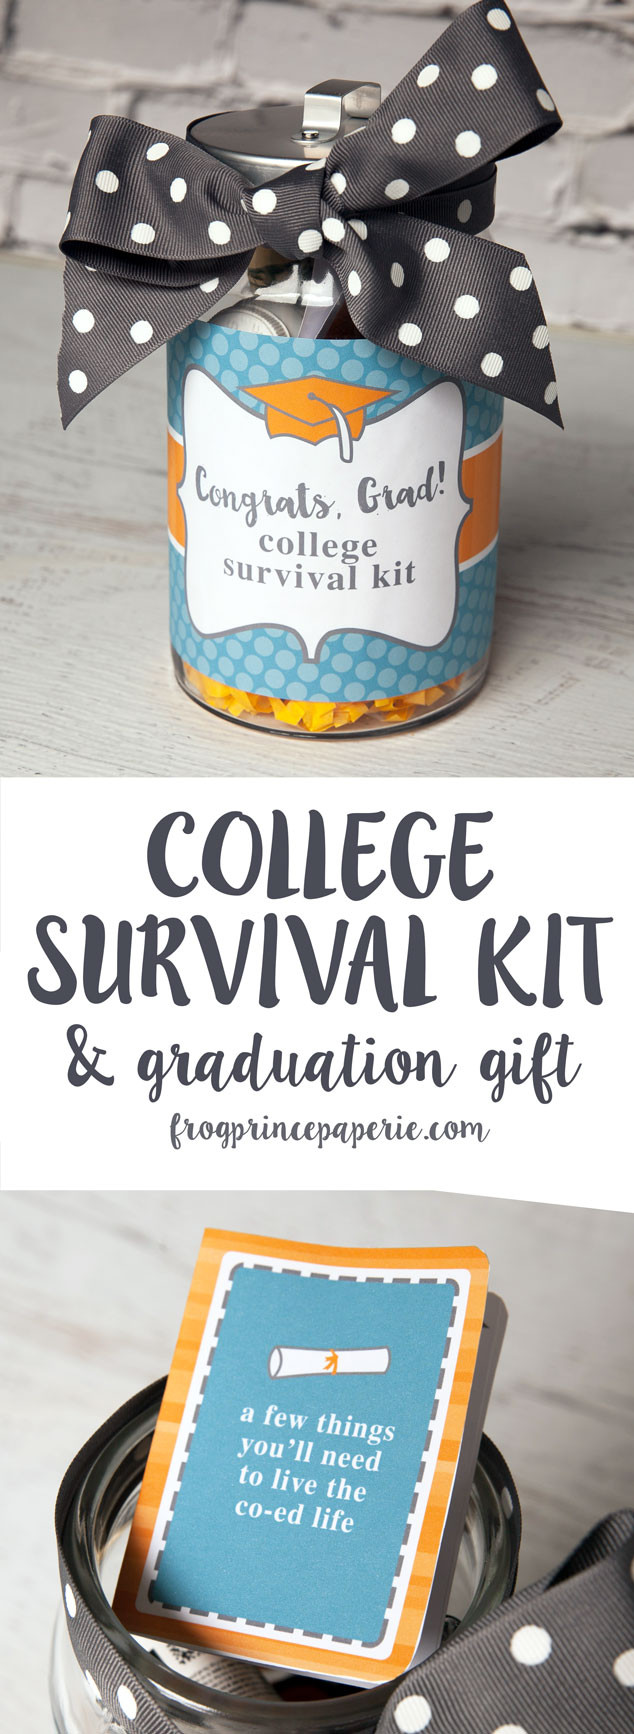 DIY Graduation Gifts
 College Survival Kit DIY Graduation Gift Frog Prince Paperie